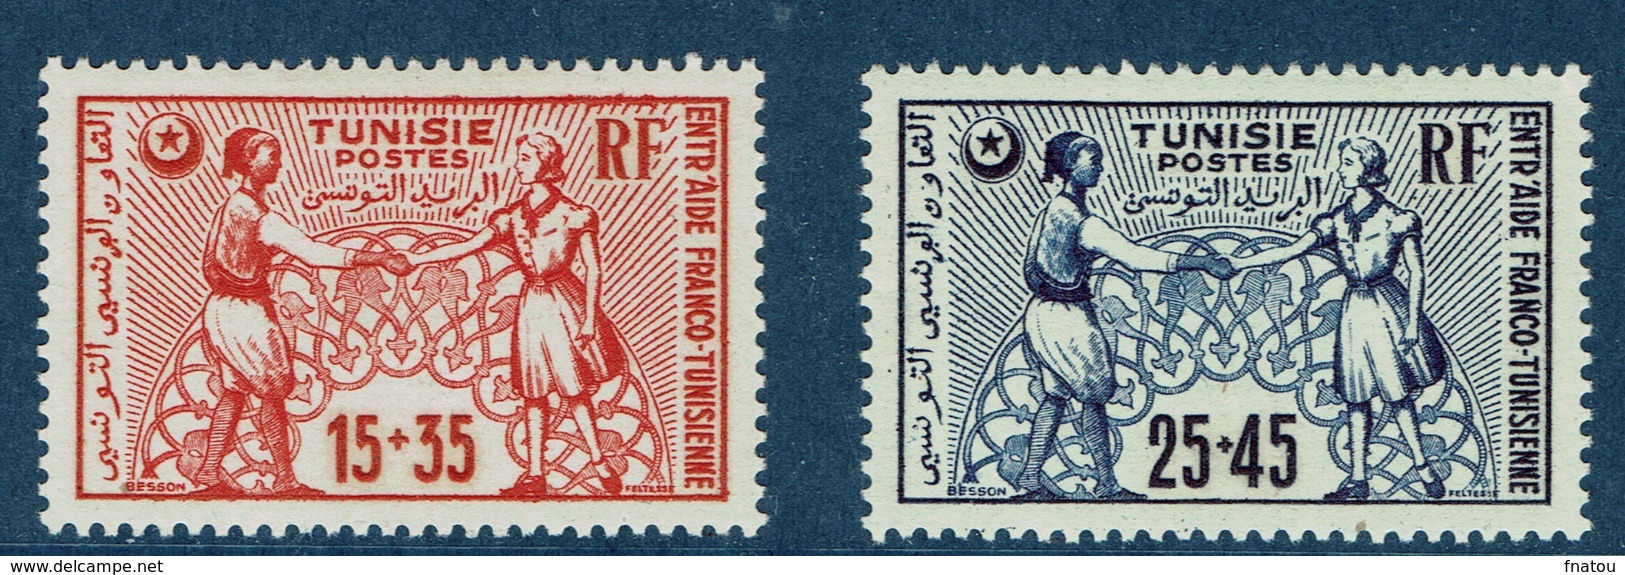 French Tunisia, "Fonds D'Entraide", 1950, MH VF   A Pair - Unused Stamps